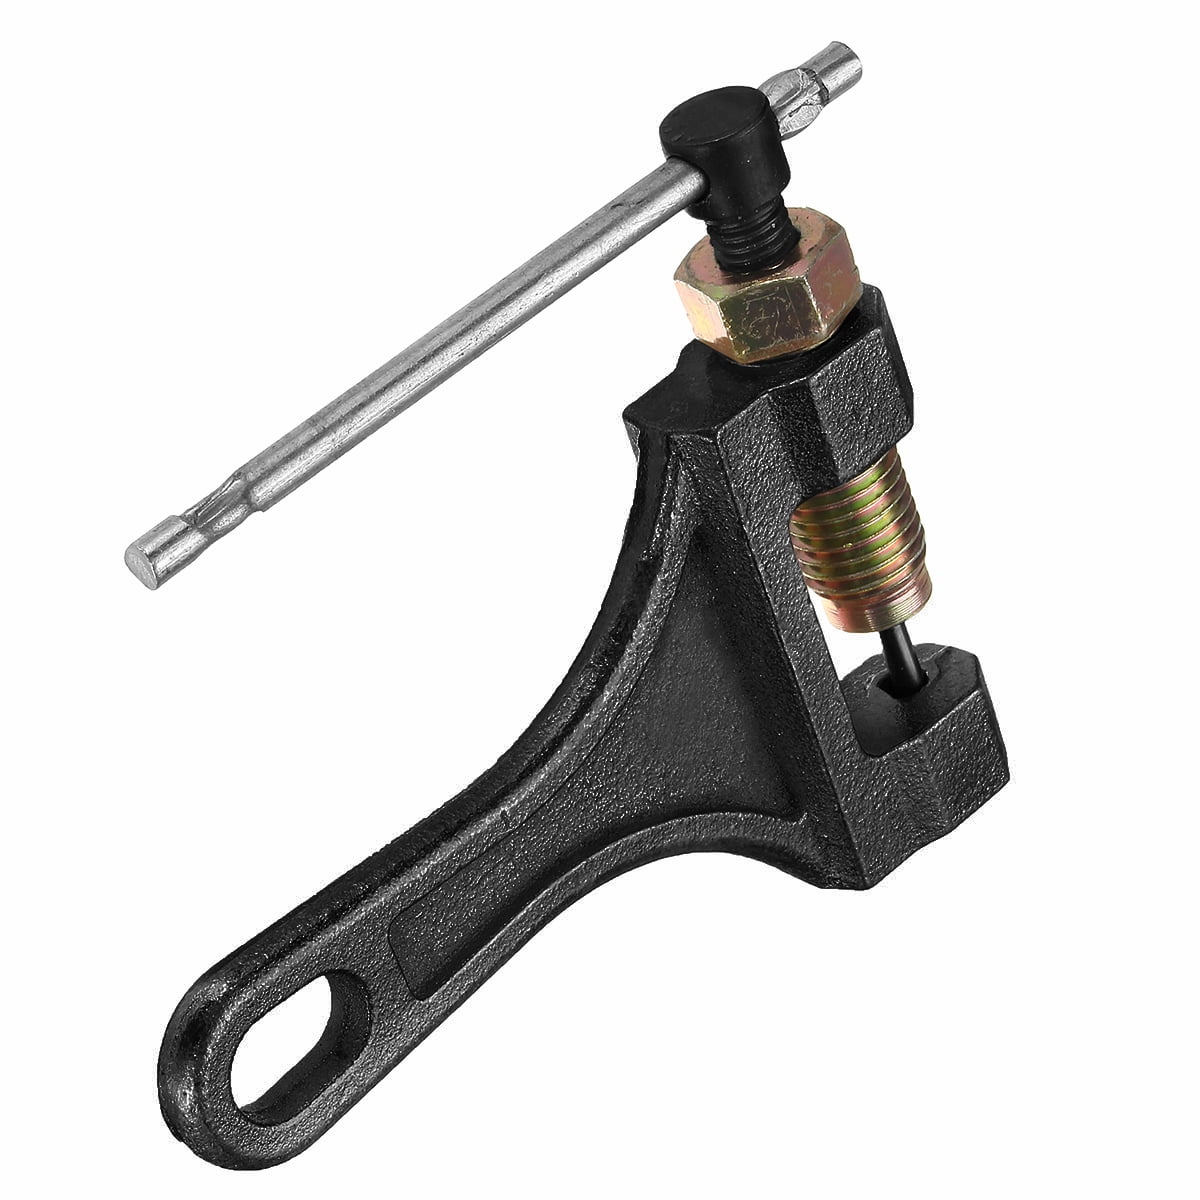 ZIANG 1pcs Chain Breaker Link Splitter Pin Remover Repair Tool for Motorcycle Bicycle Tractor 